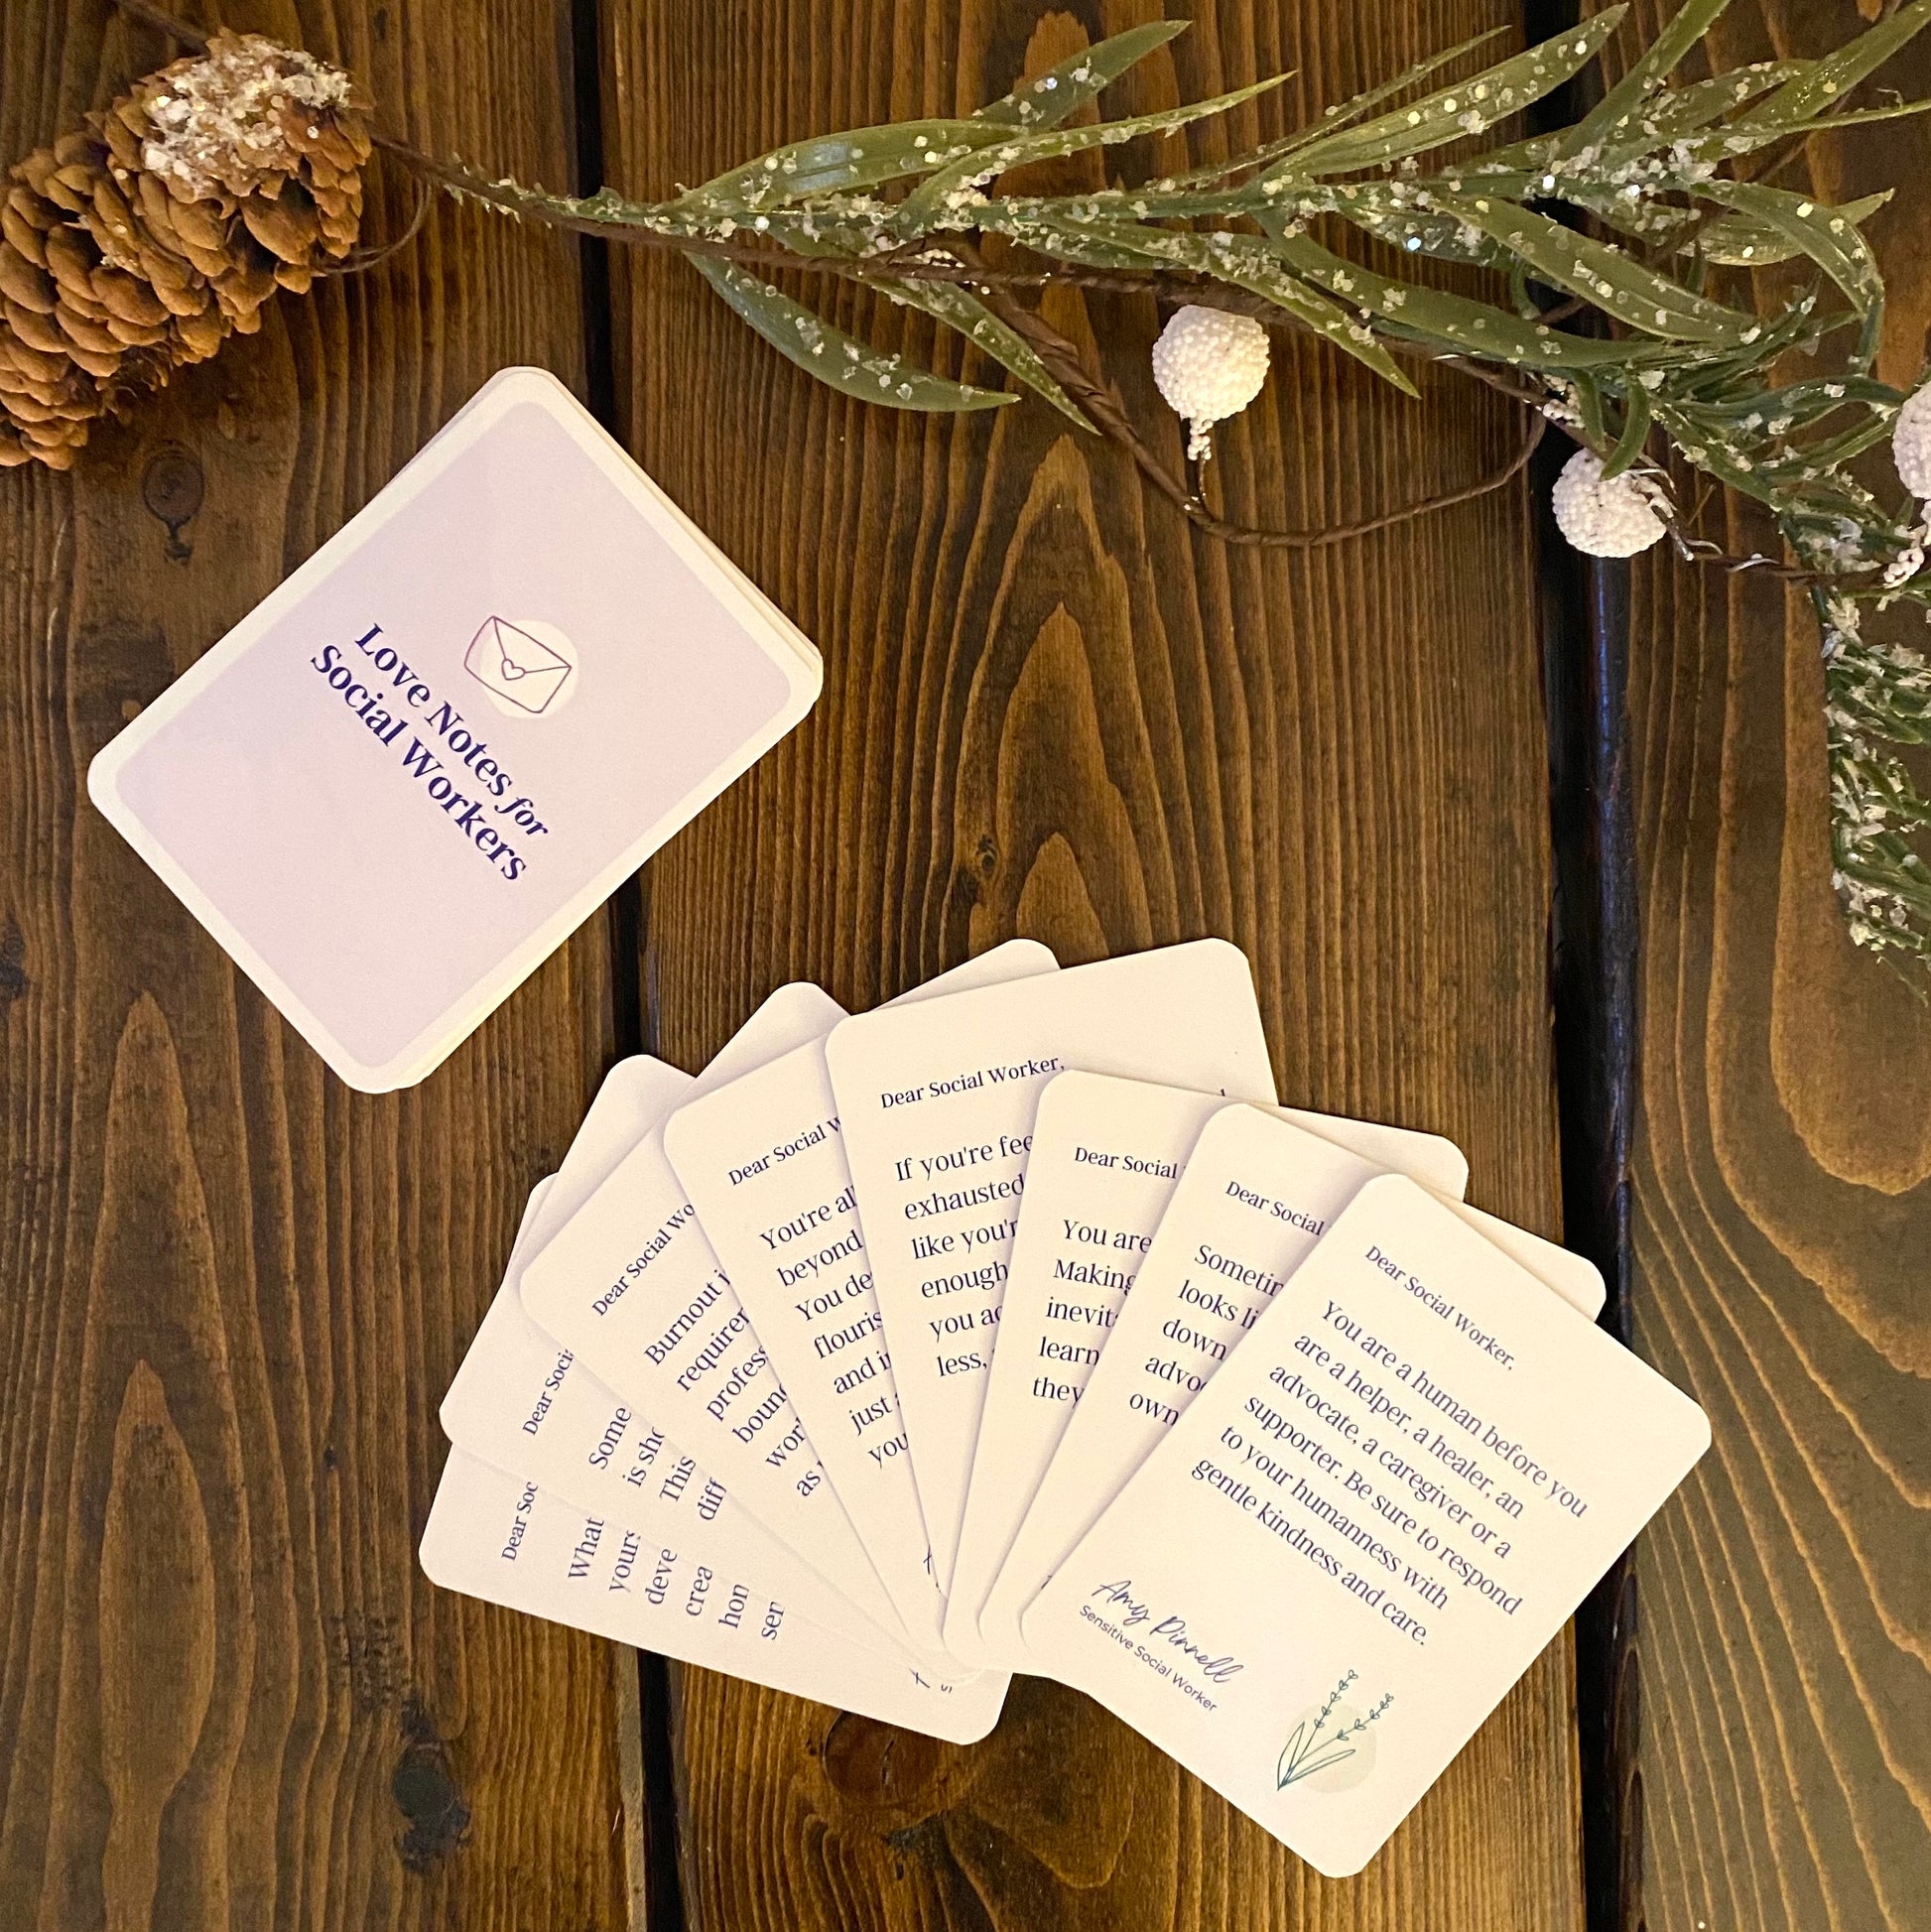 The card deck is stacked on a brown table beside a Christmas garland. The back  of the card deck is purple and says "Love Notes for Social Workers" on them. 8 cards are fanned out on the table and the top one reads:  "Dear Social Worker, You are a human before you are a helper, a healer, an advocate, a caregiver, or a supporter. Be sure to respond to your humanness with gentle kindness and care."